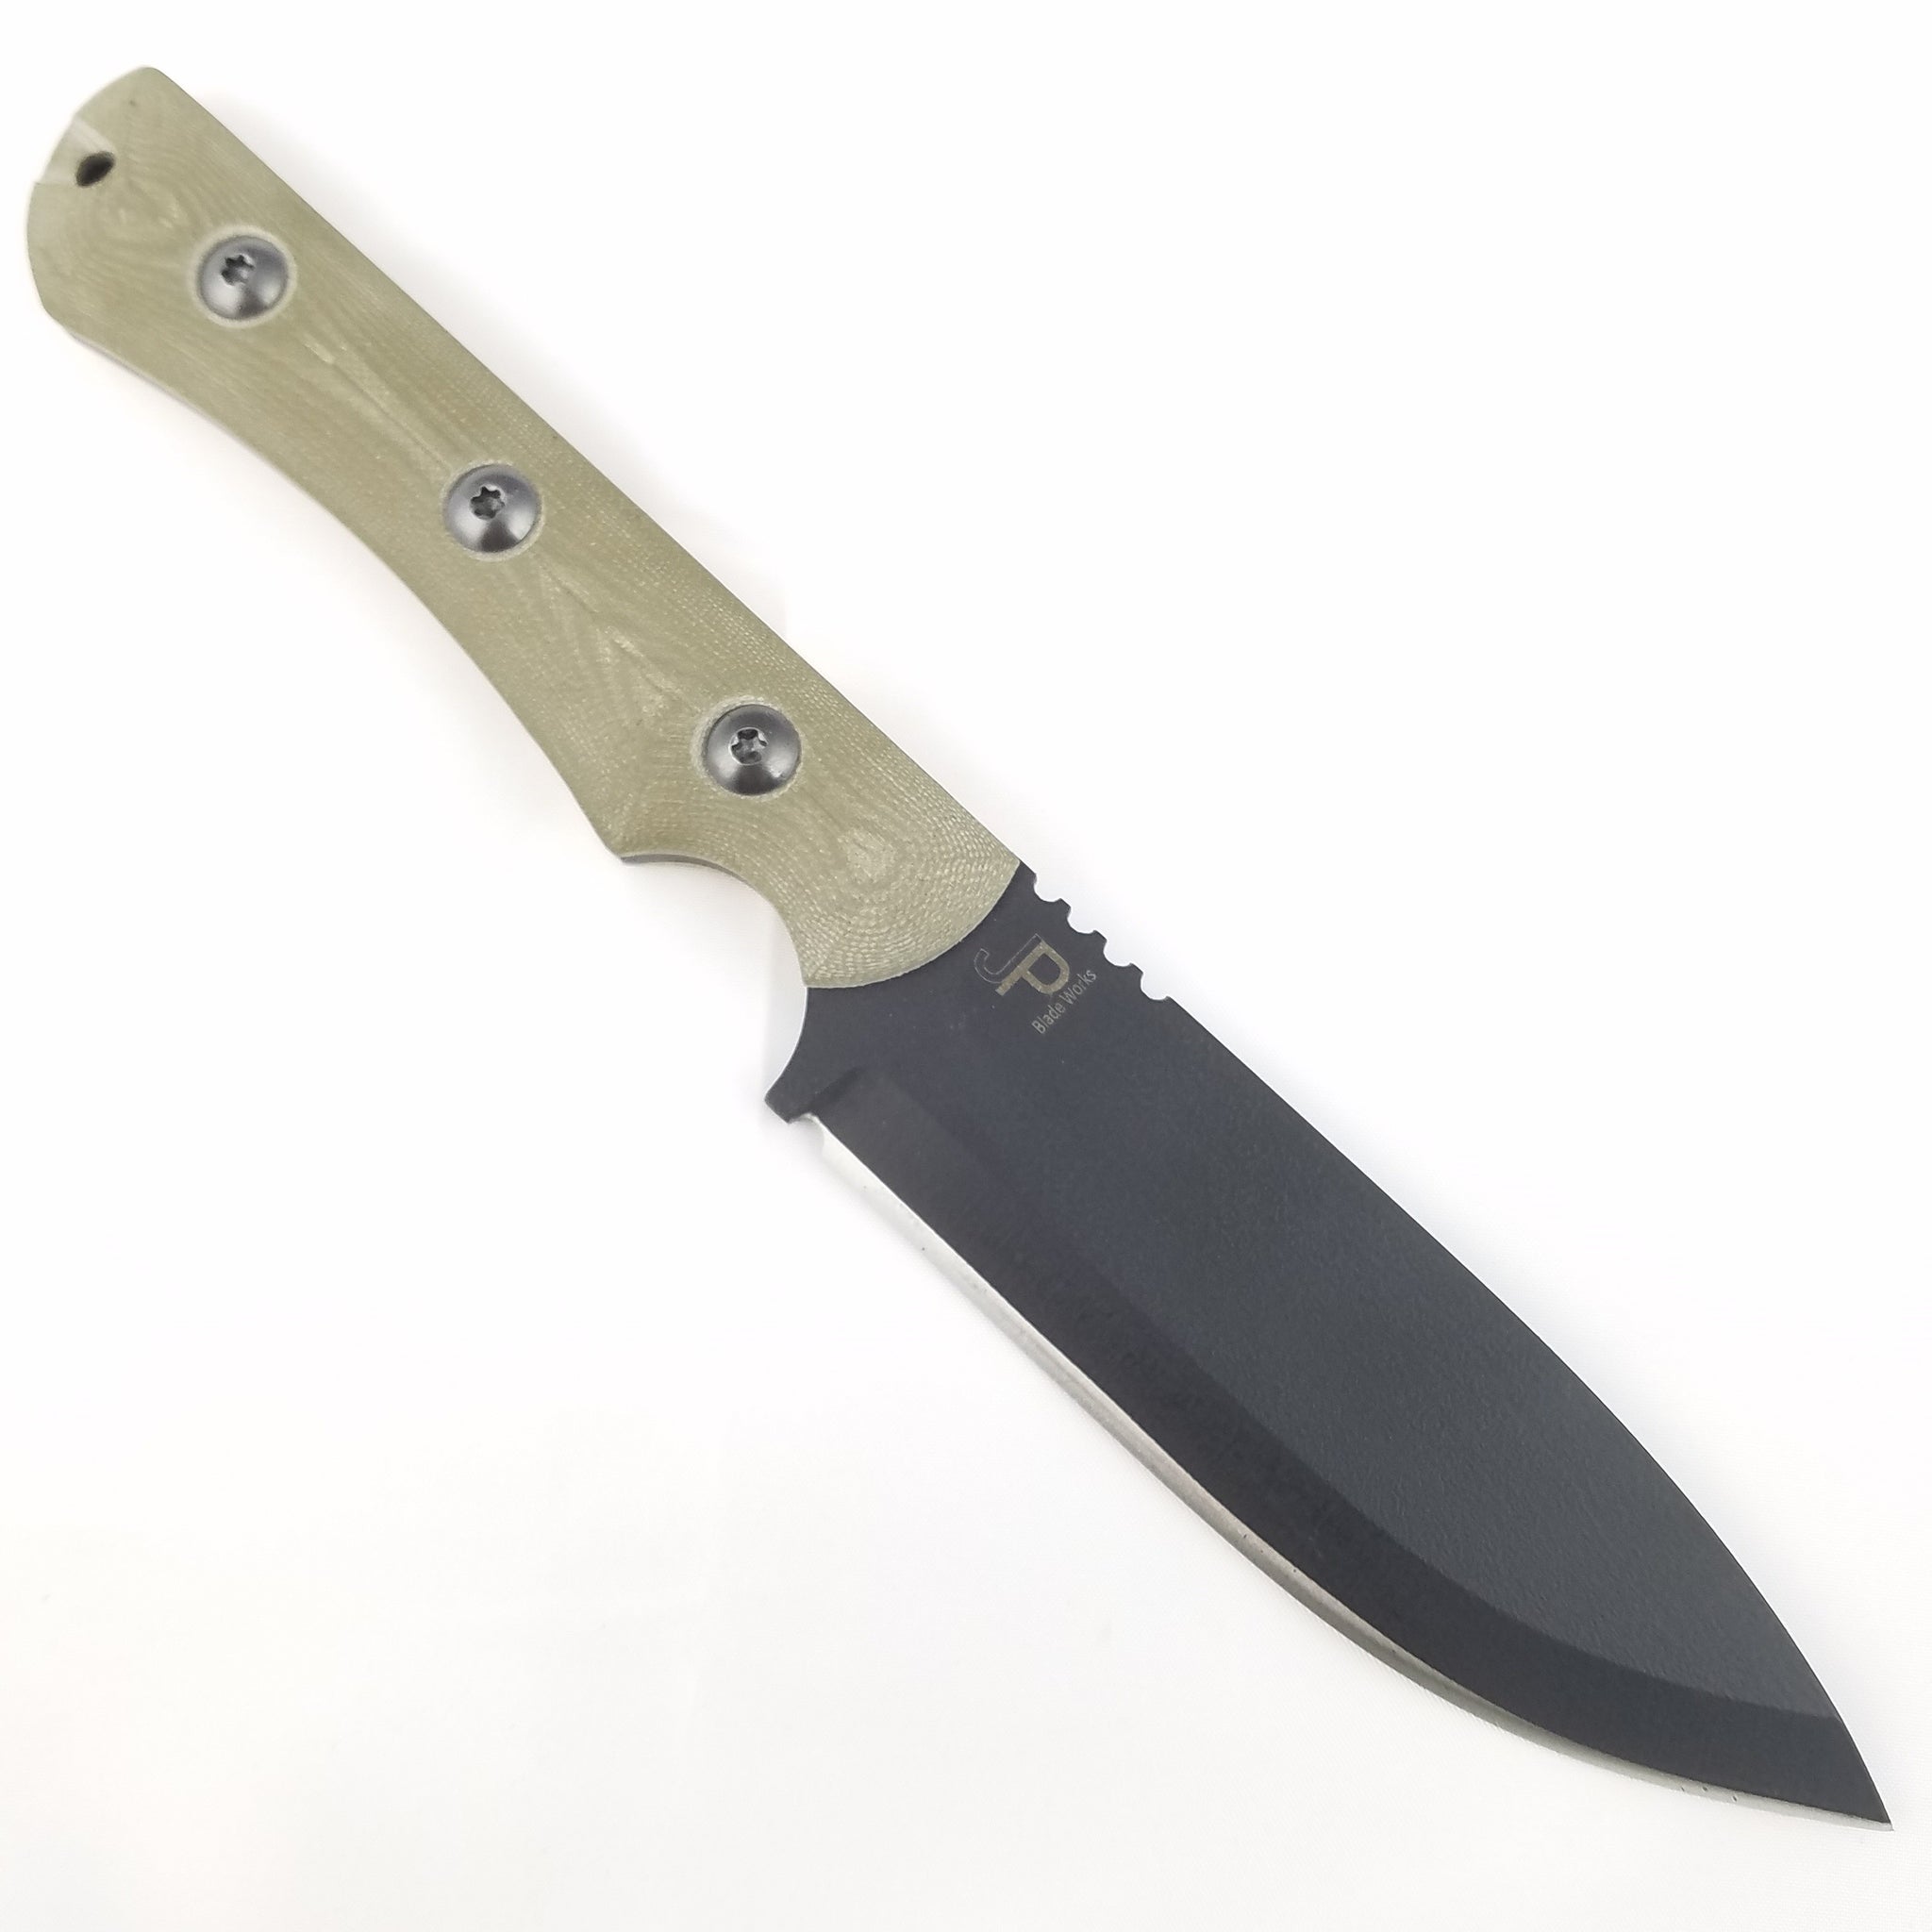 Jason Perry Blade Works - Knife Country, USA